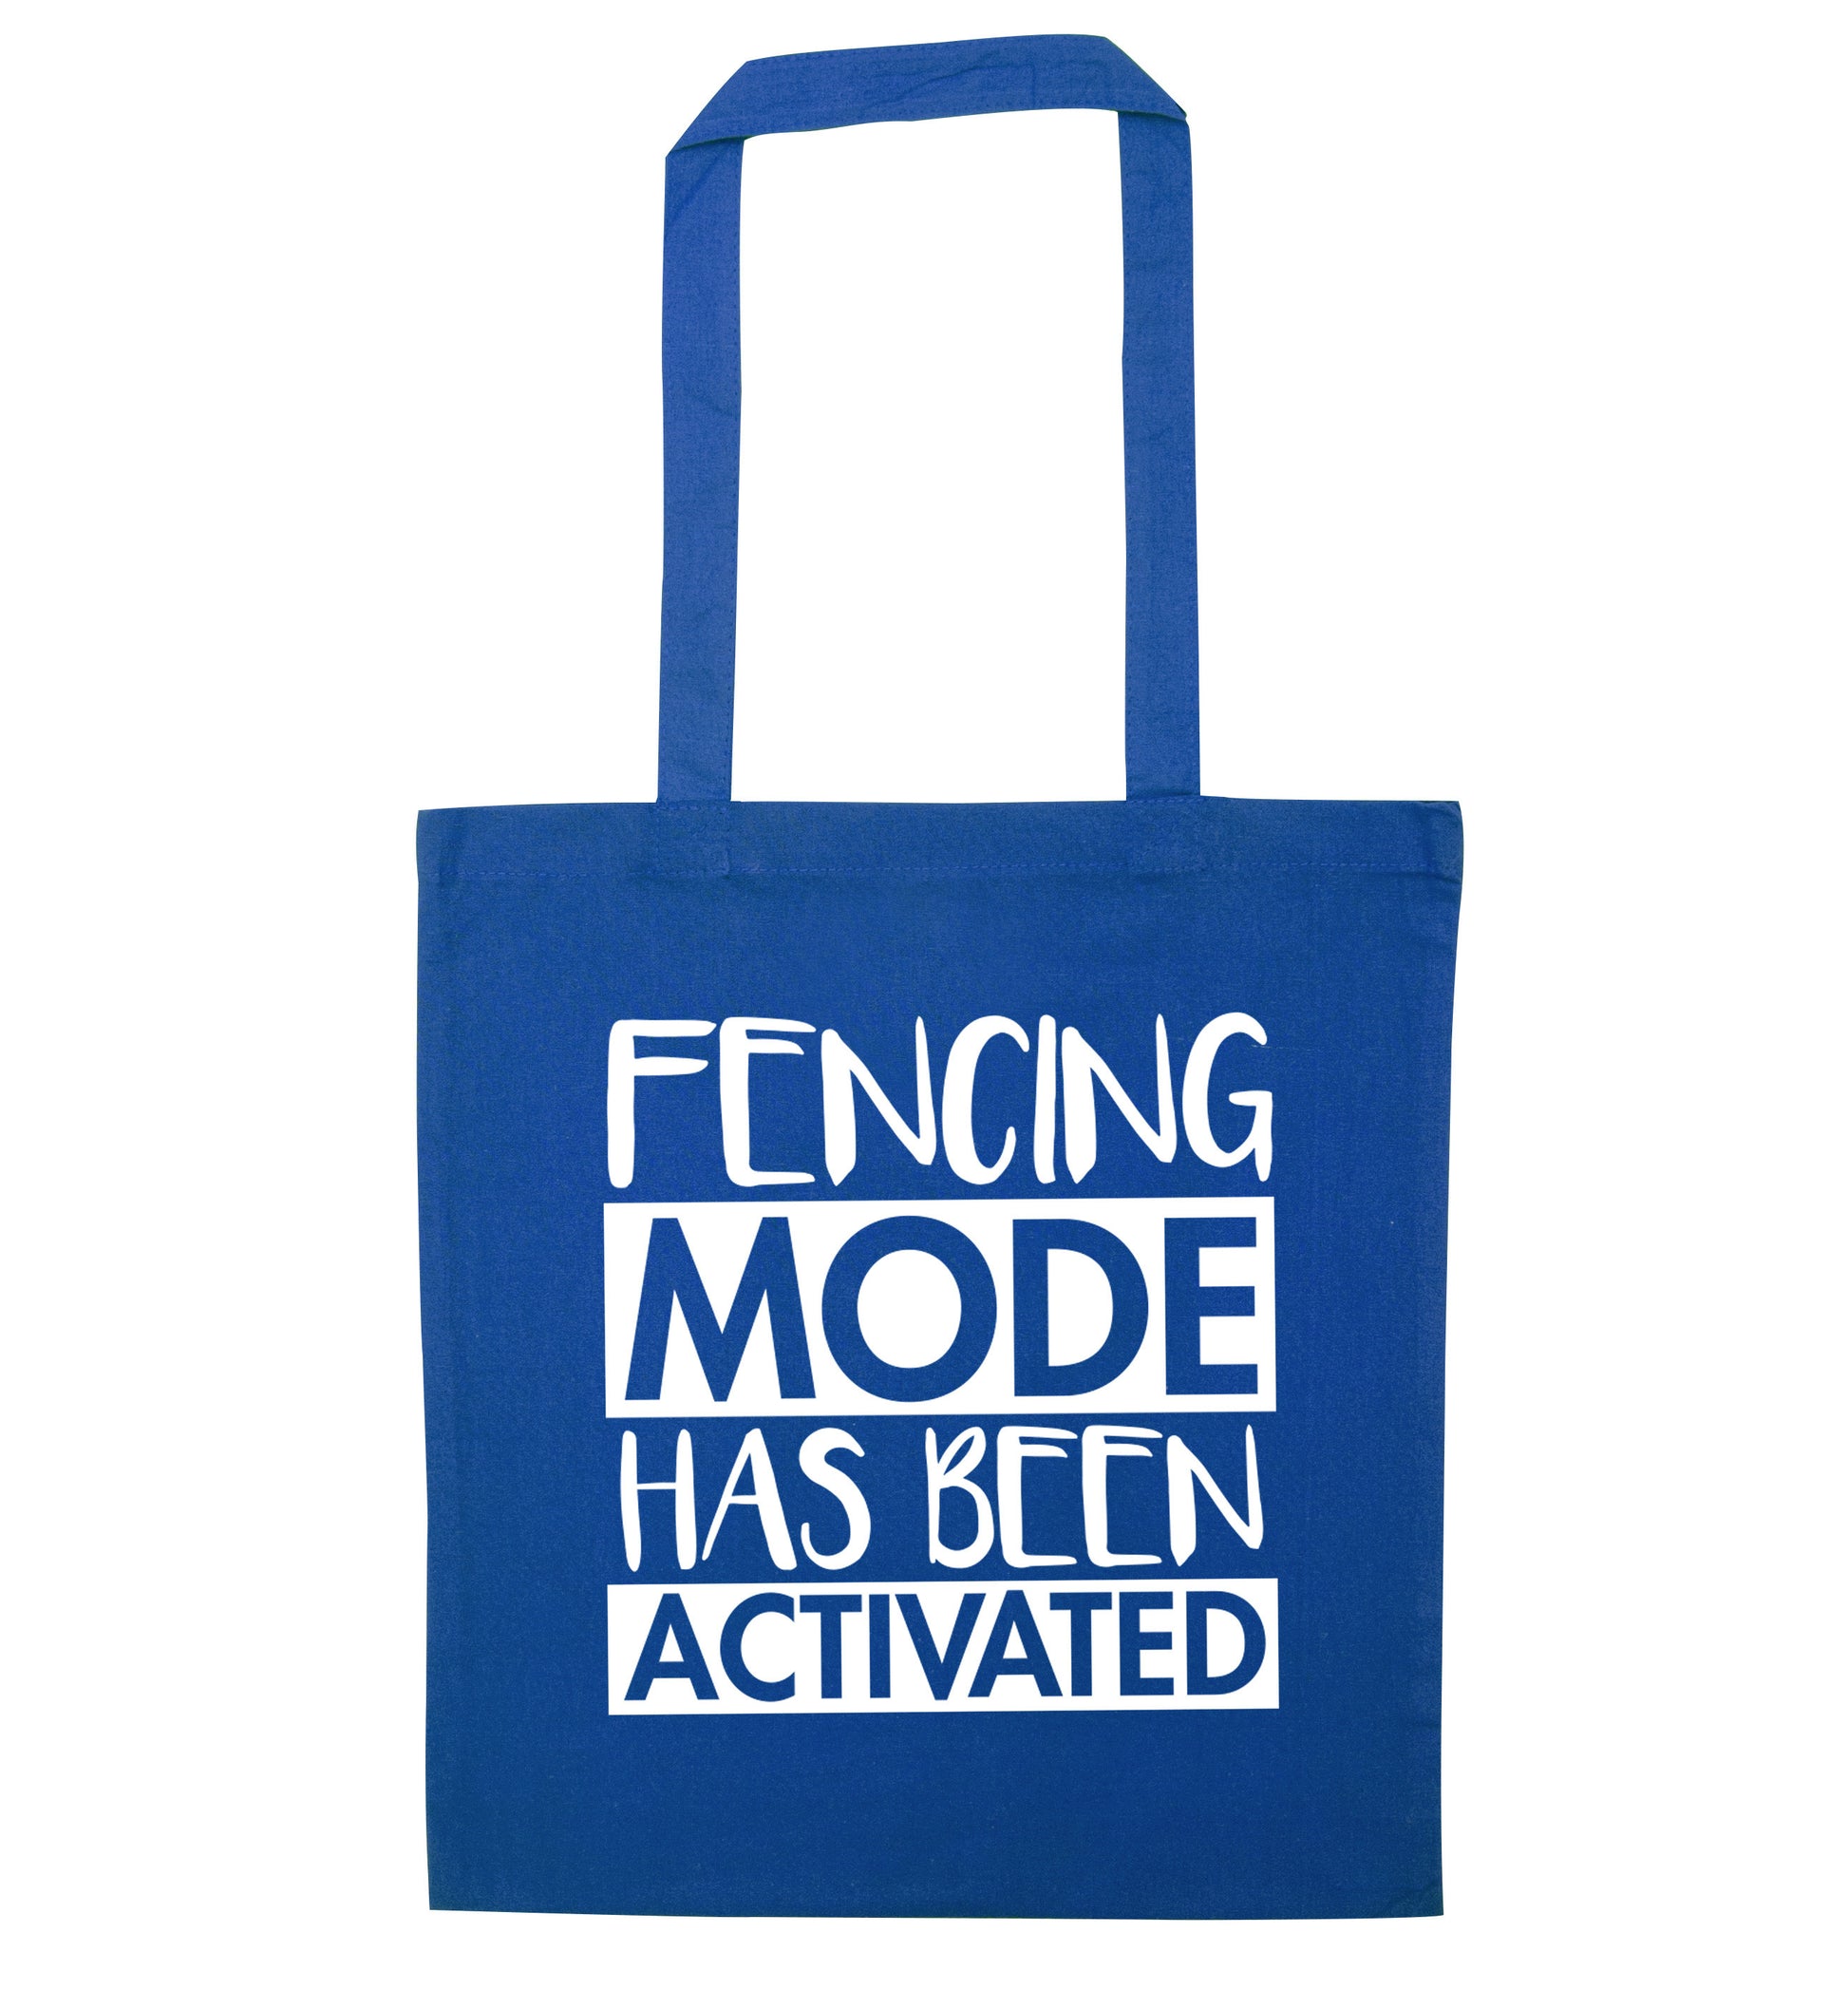 Fencing mode activated blue tote bag